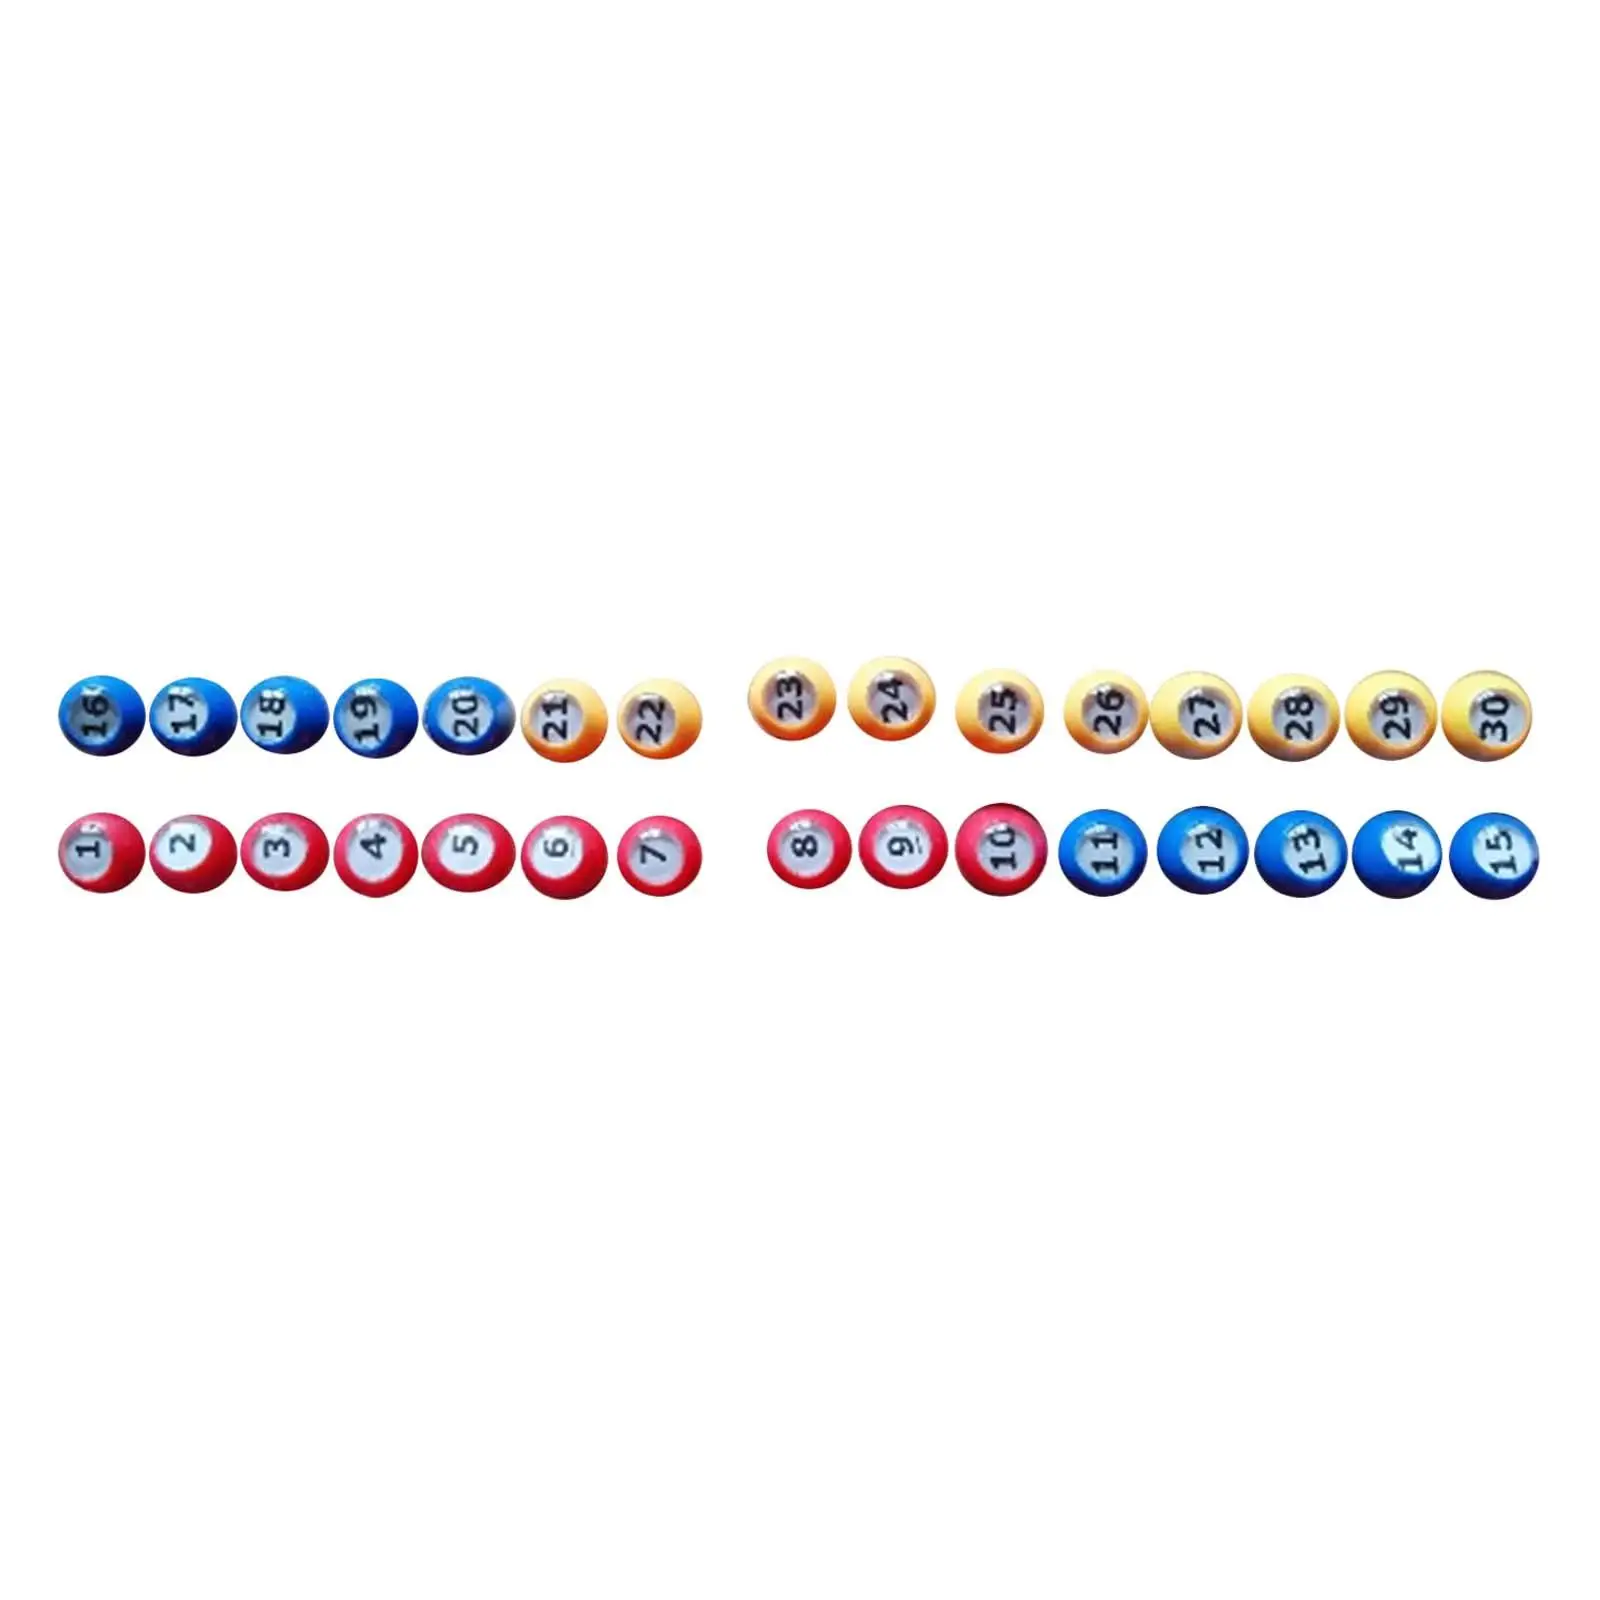 30 Pieces Bingo Ball Replacement Parts Universal Fittings Tally Ball 1-30 Numbers for Company Parties Nights Birthday Household